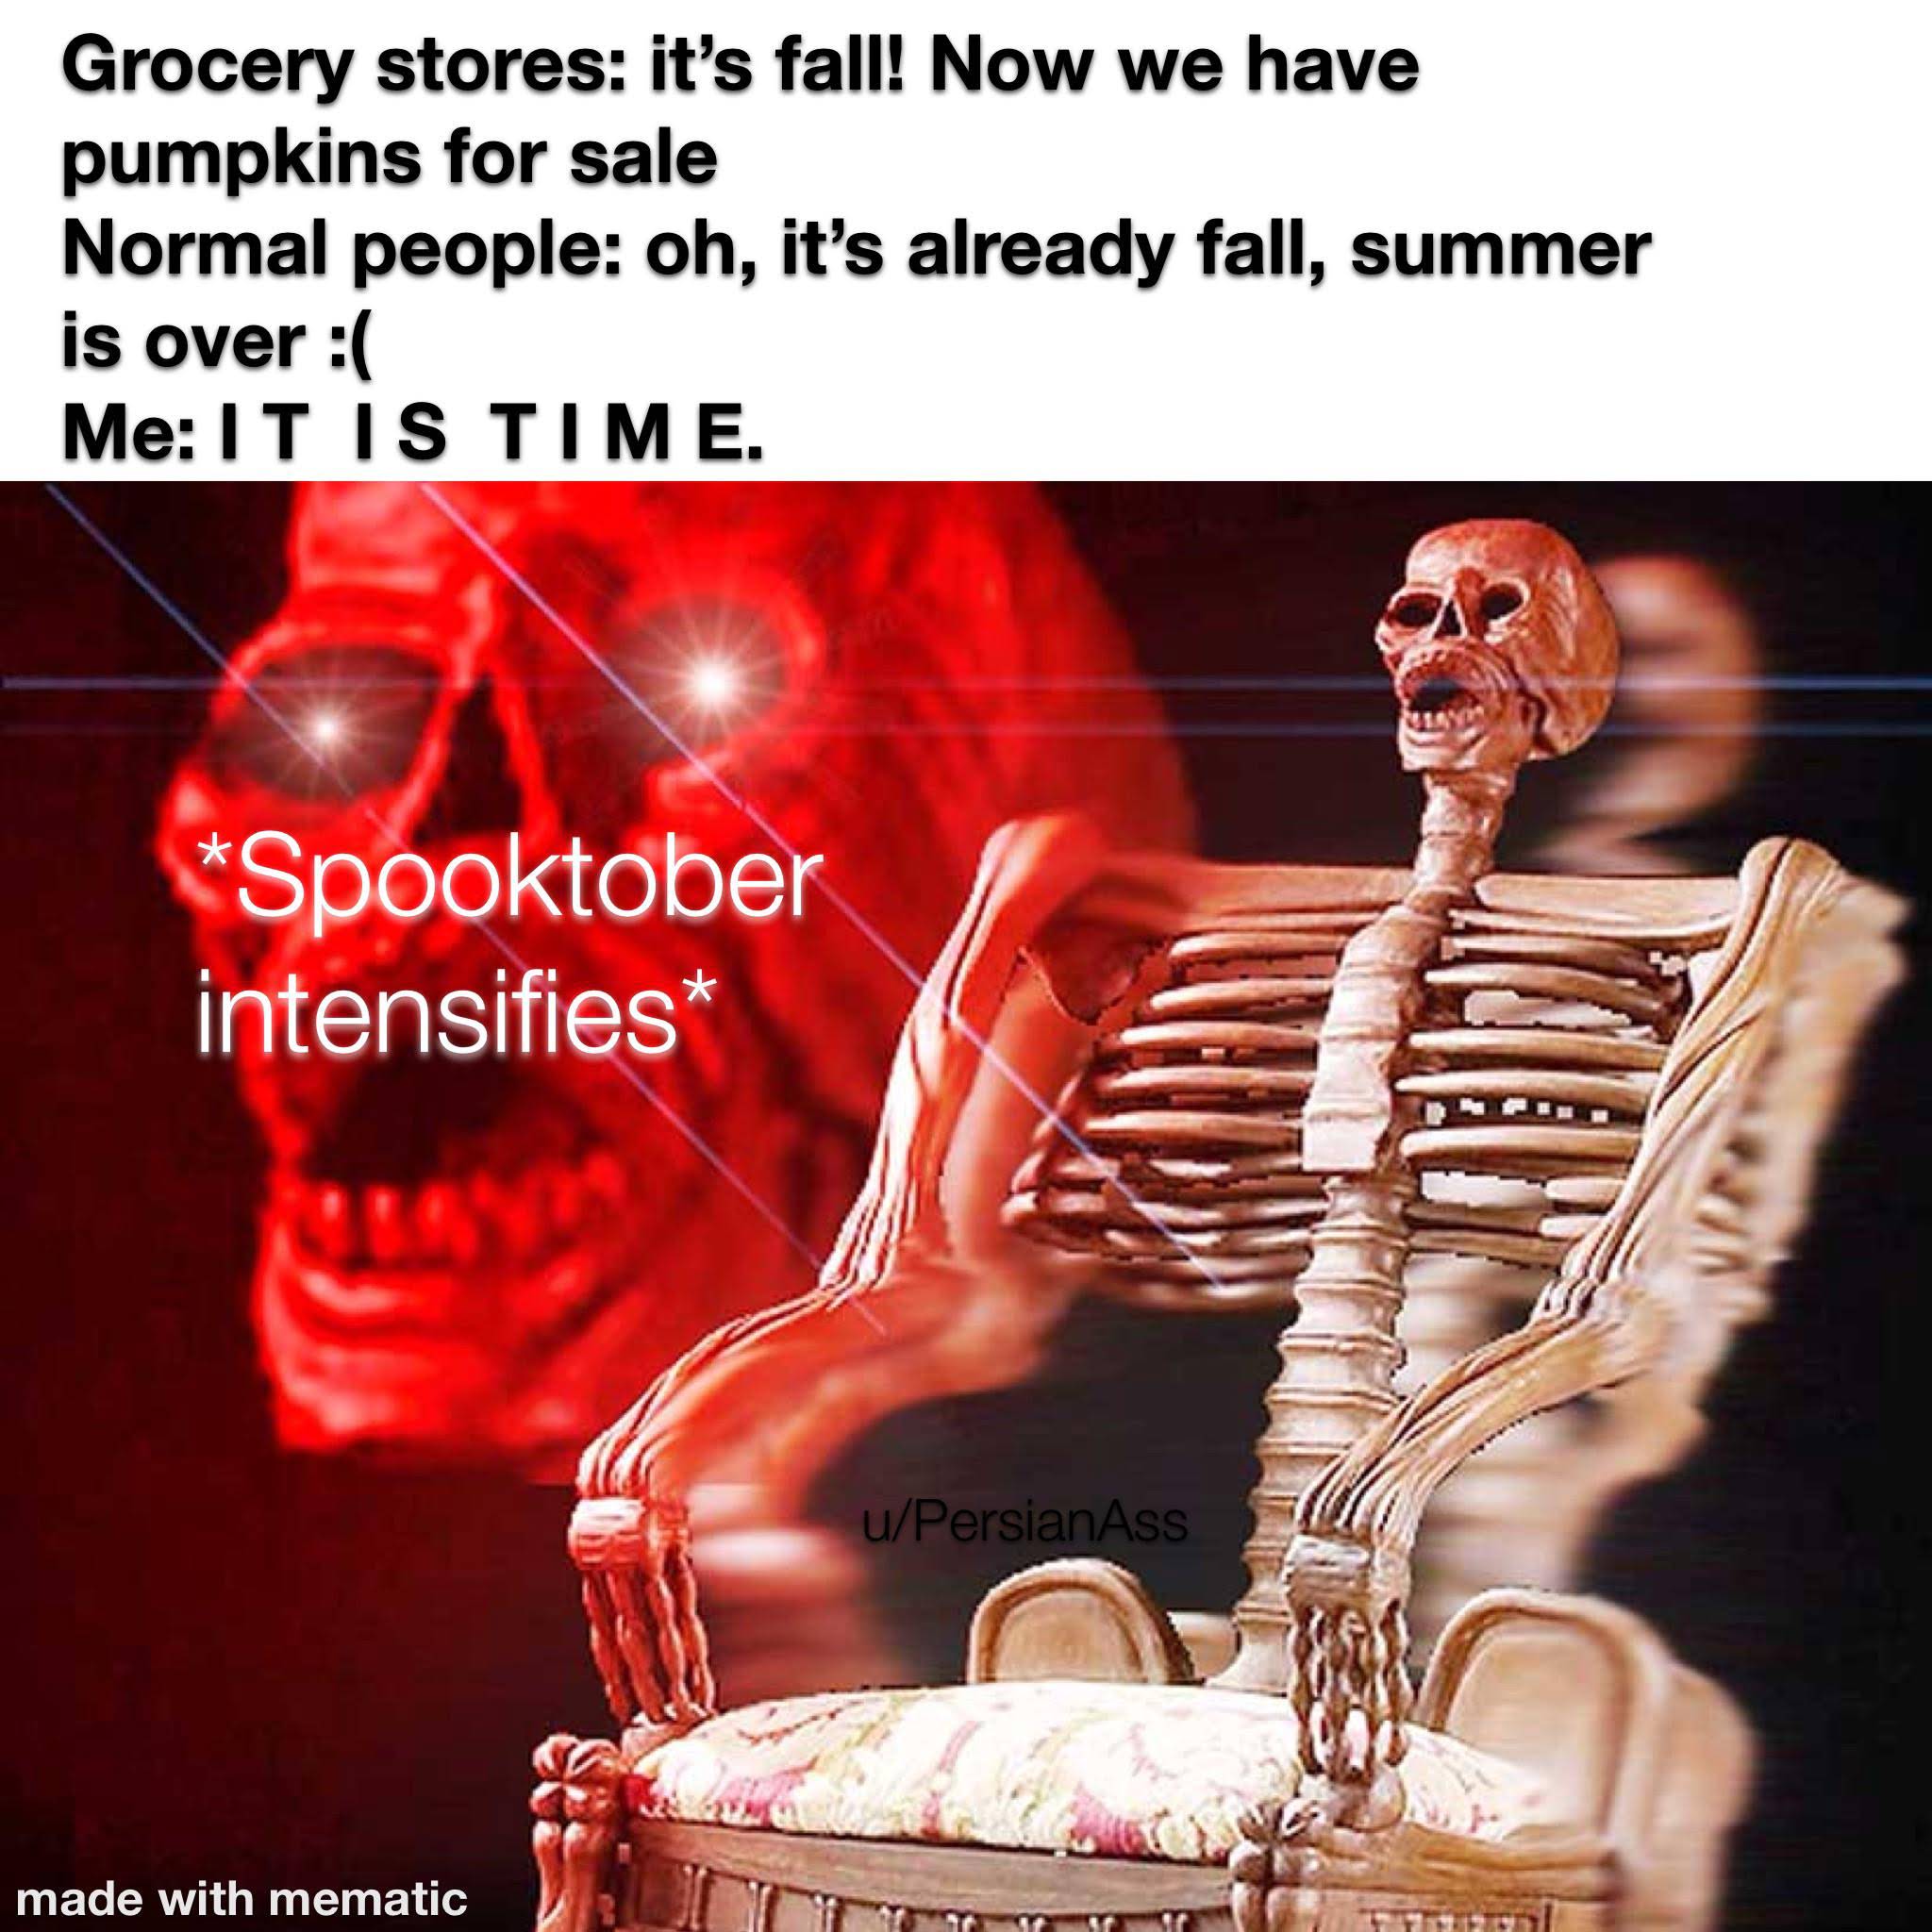 dank memes - skeleton chair - Grocery stores it's fall! Now we have pumpkins for sale Normal people oh, it's already fall, summer is over Me It Is Time. Spooktober intensifies uPersianAss made with mematic